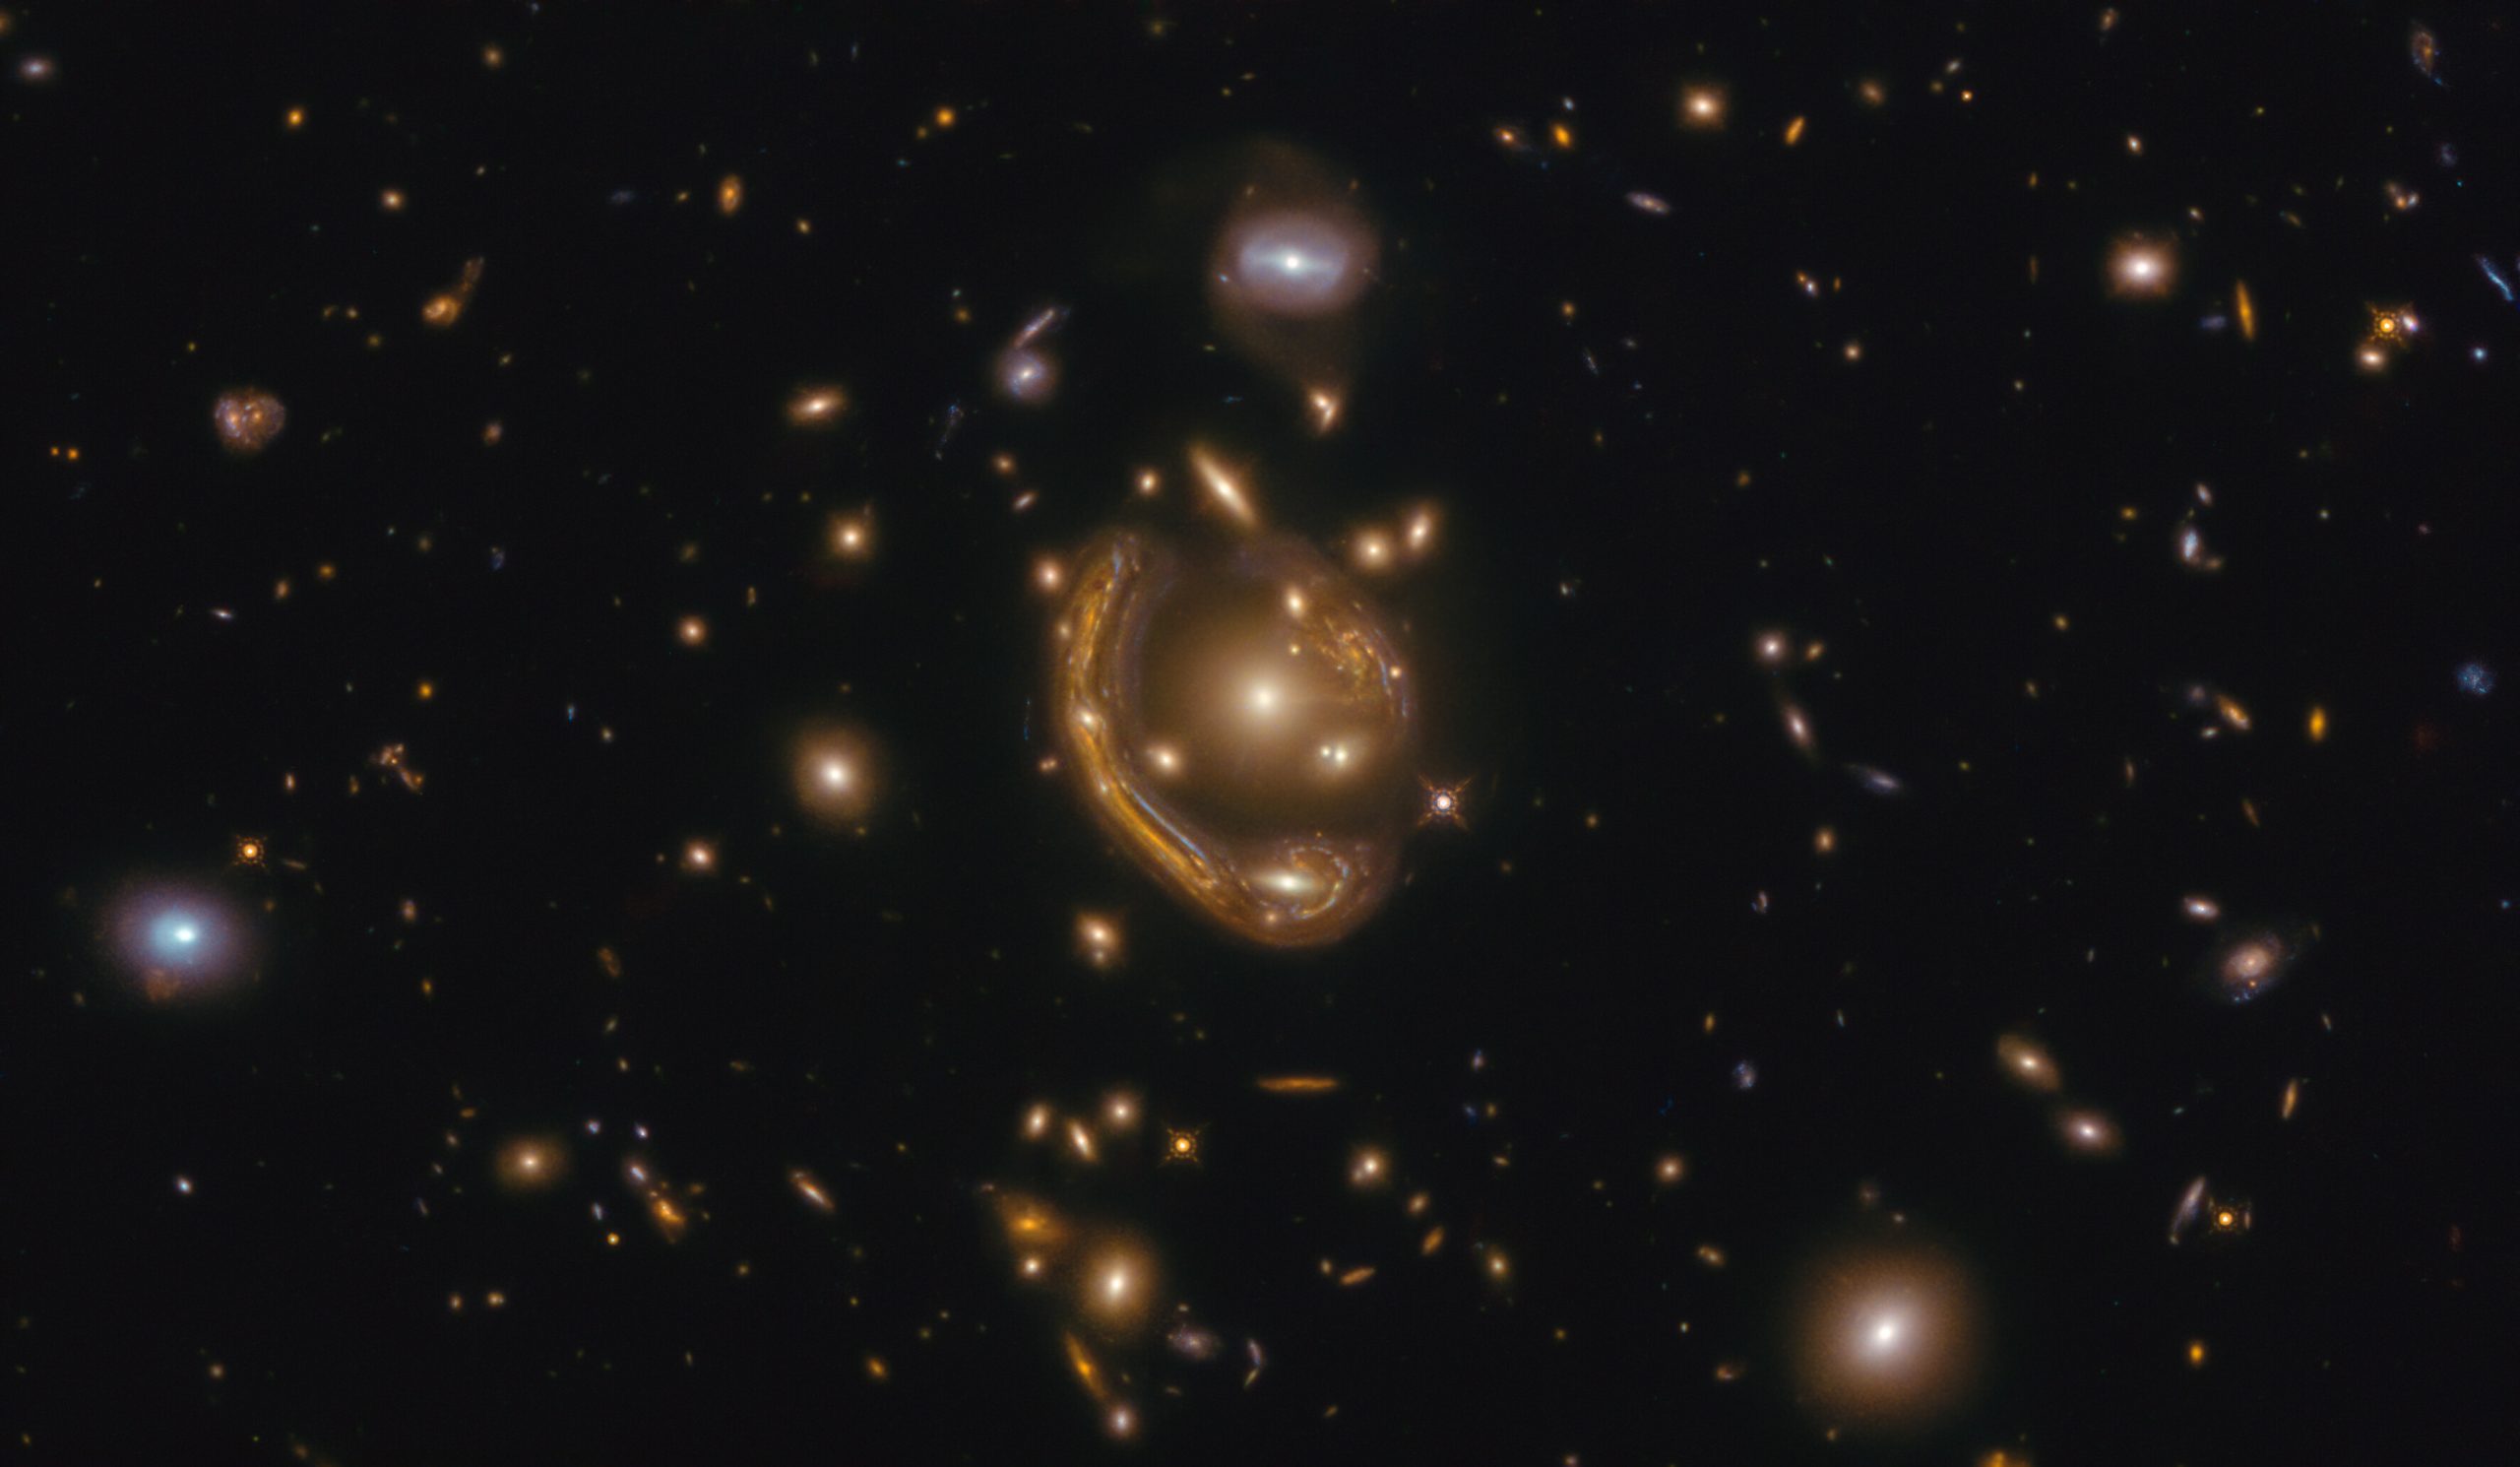 The month of February includes an image of an Einstein ring known as GAL-CLUS-022058s. Credit: ESA/Hubble & NASA, S. Jha